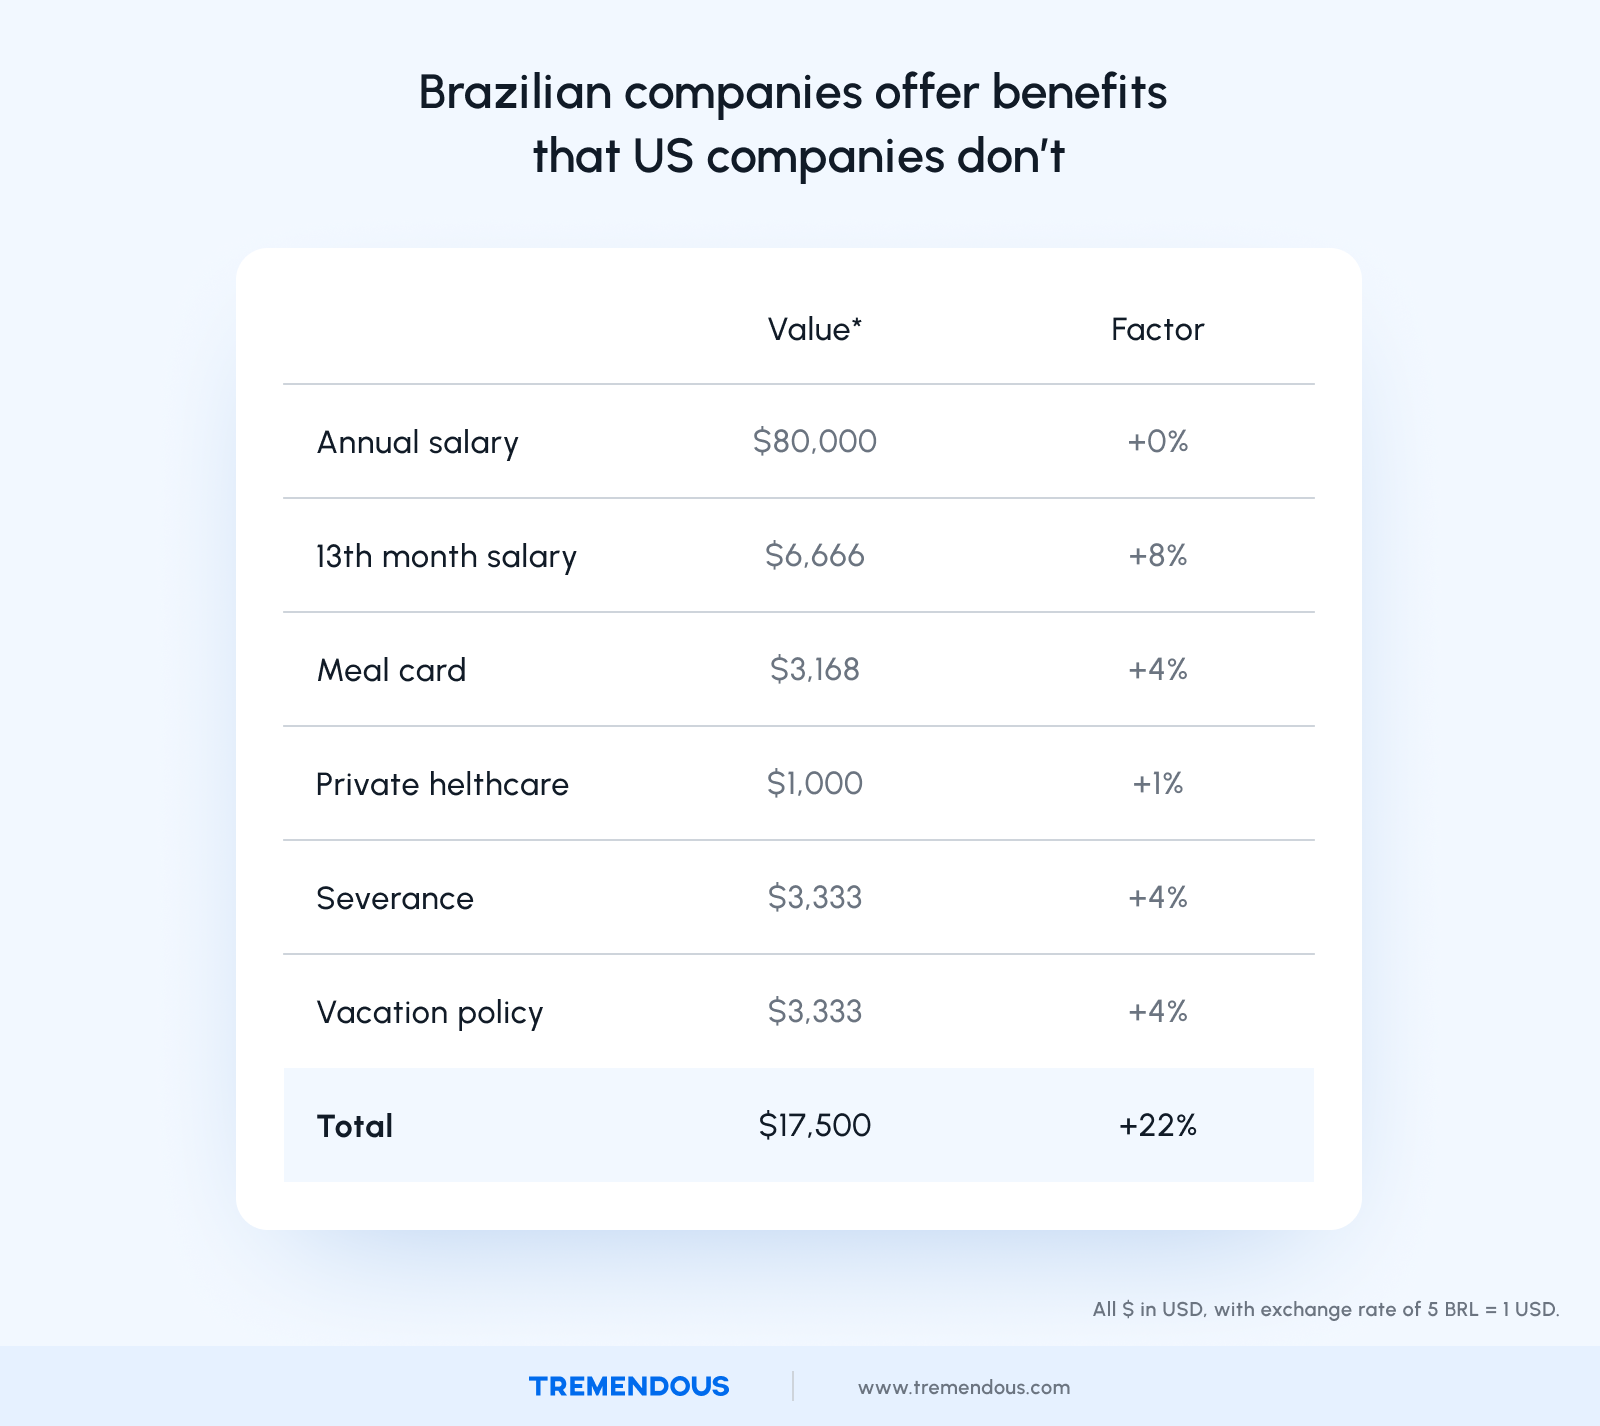 Brazilian companies offer benefits that US companies don't